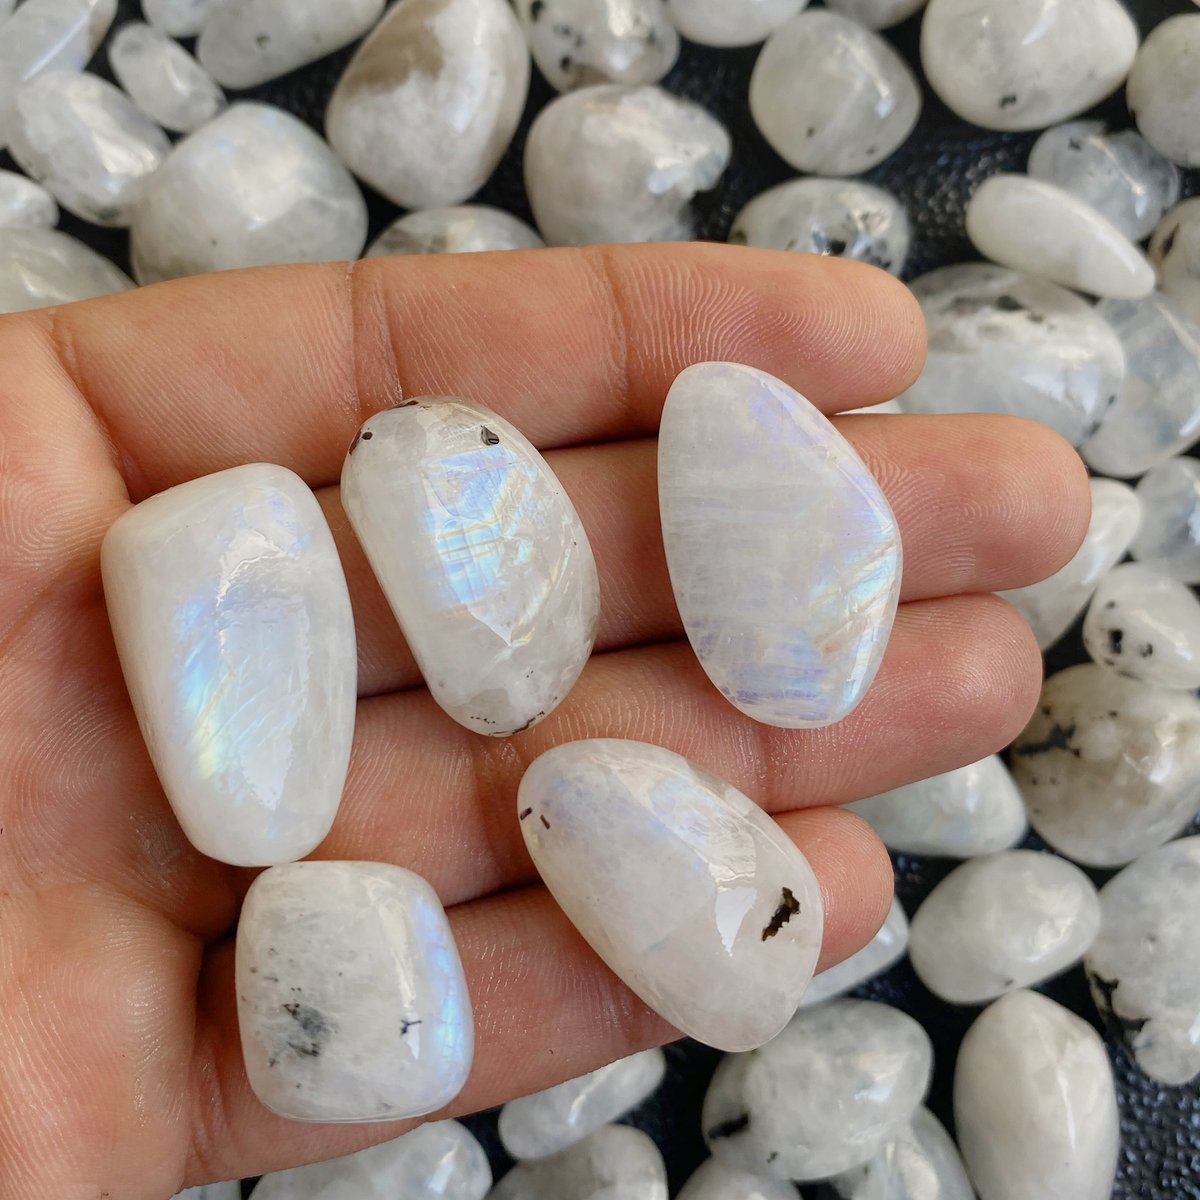 Rainbow Moonstone Tumbled 

We accept payment through PayPal/Bank Transfer
• 100% secure checkout with PayPal/Bank Transfer

#gemstone #cabochon #jewelrystone #naturalstone #loosegemstone #crystalgemstone #healinggemstone #moonstonetumbled #moonstonejewelry #moonstonecrystal